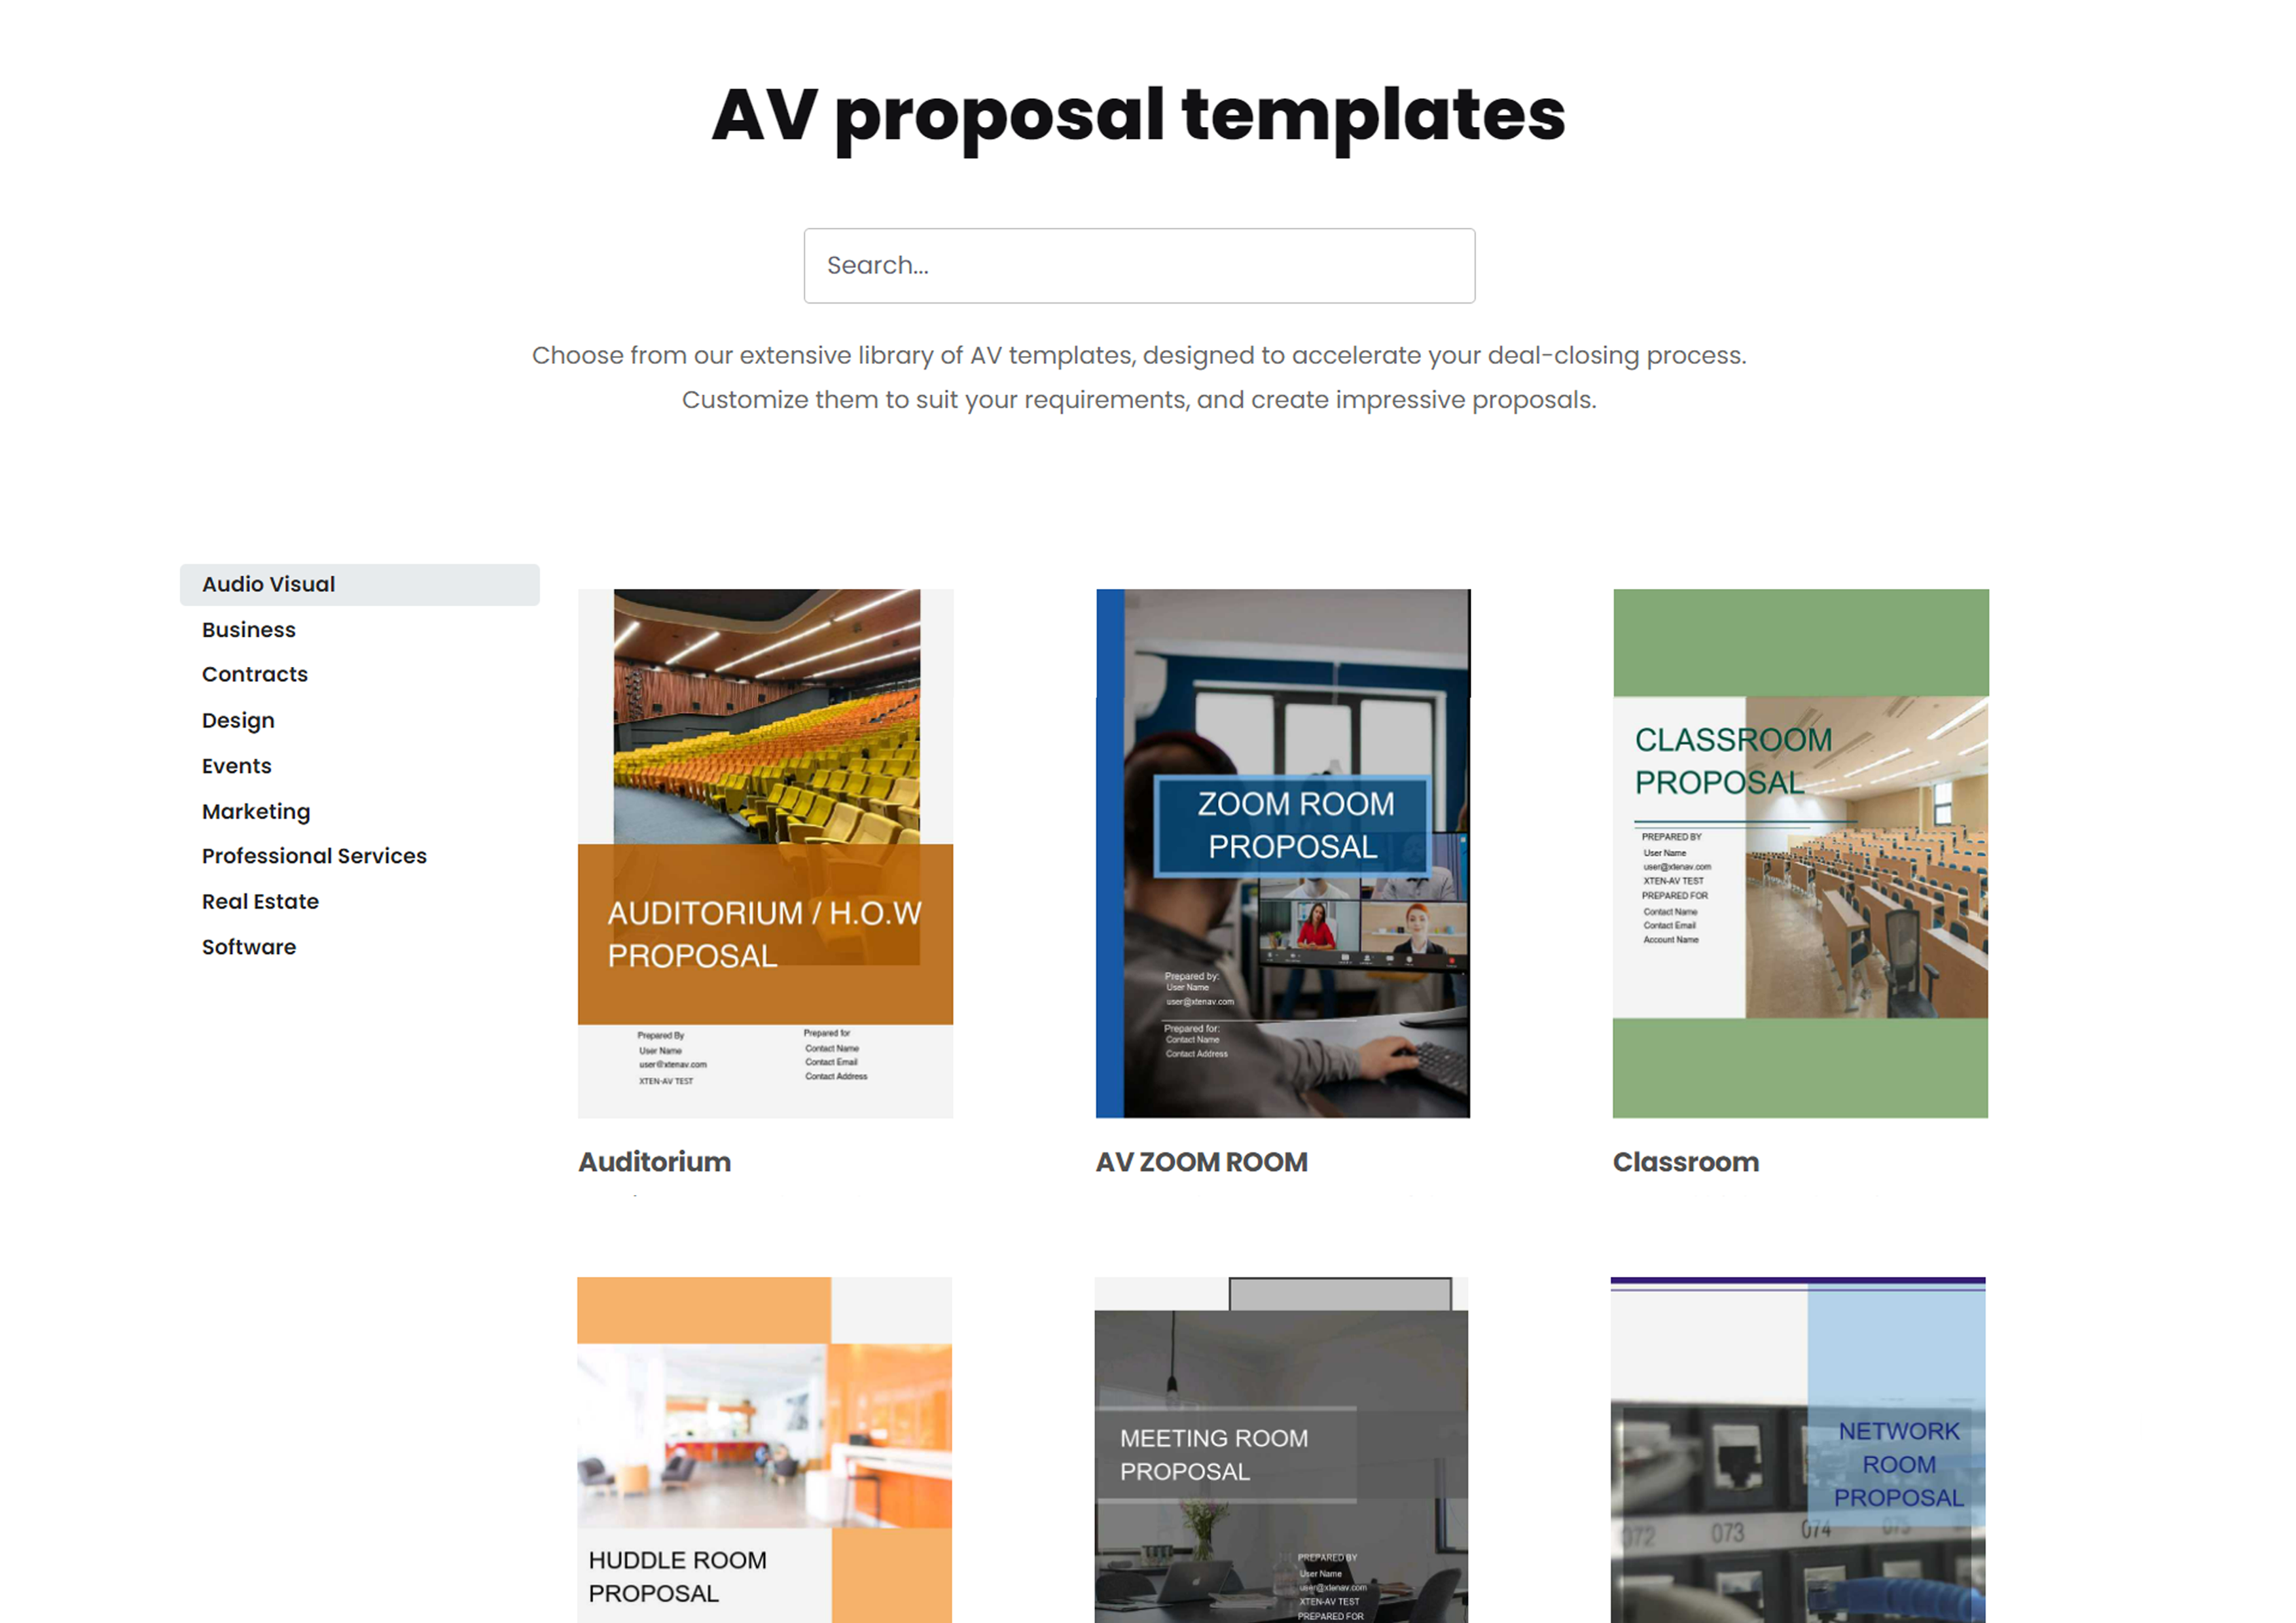 100+ Proposal Templates, create by experts: Customize them & create winning proposals!